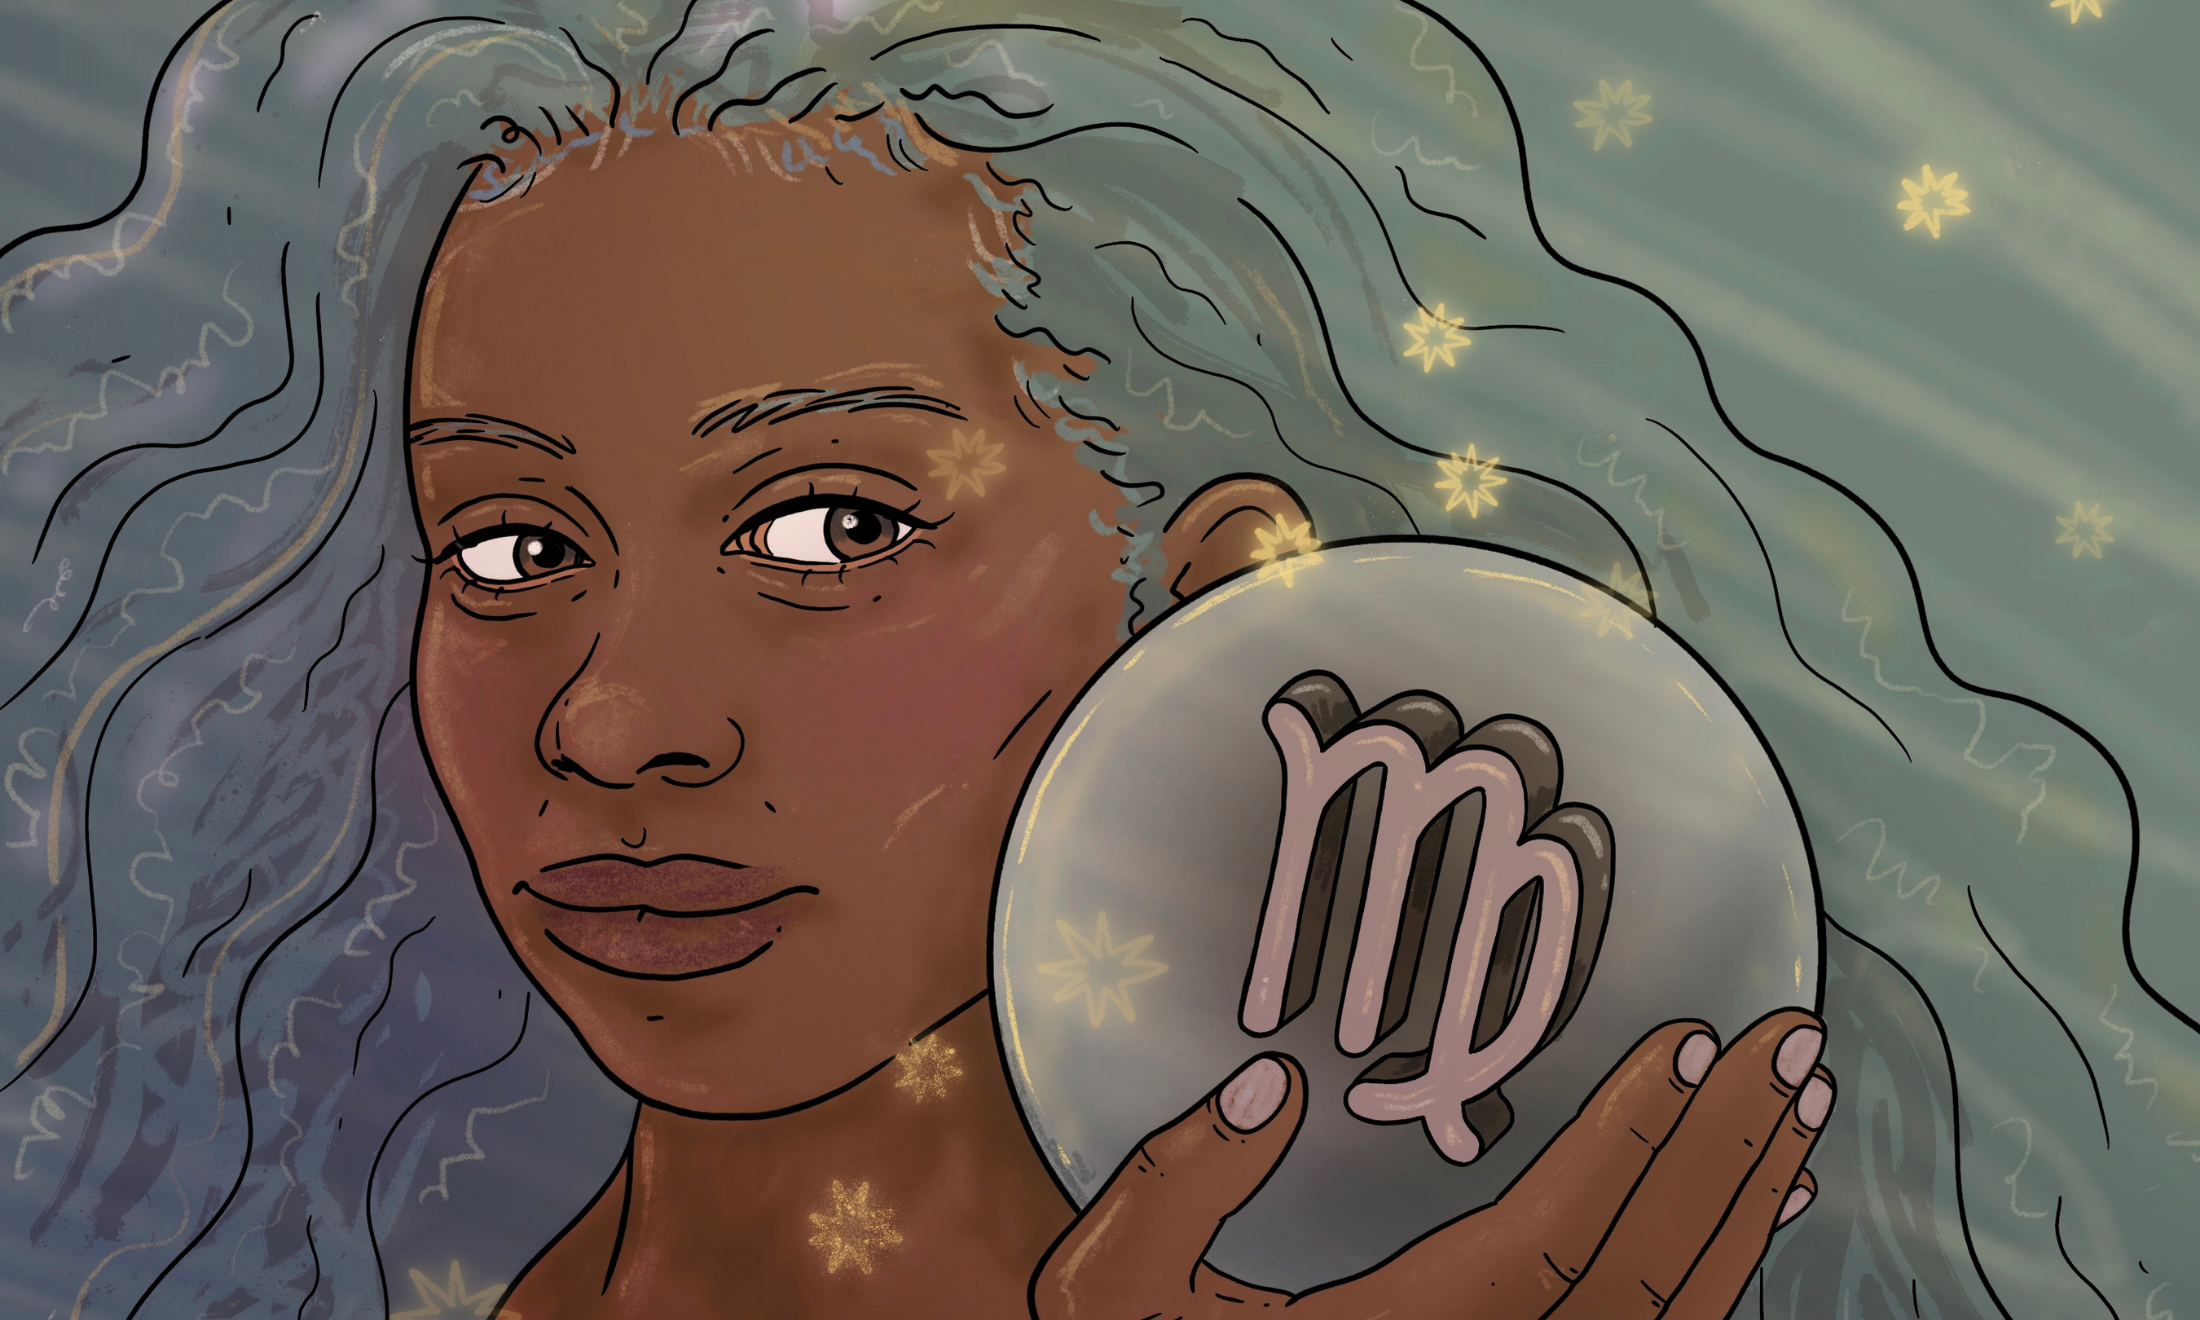 A Woman Holding Crystal Ball With Virgo Sign In It